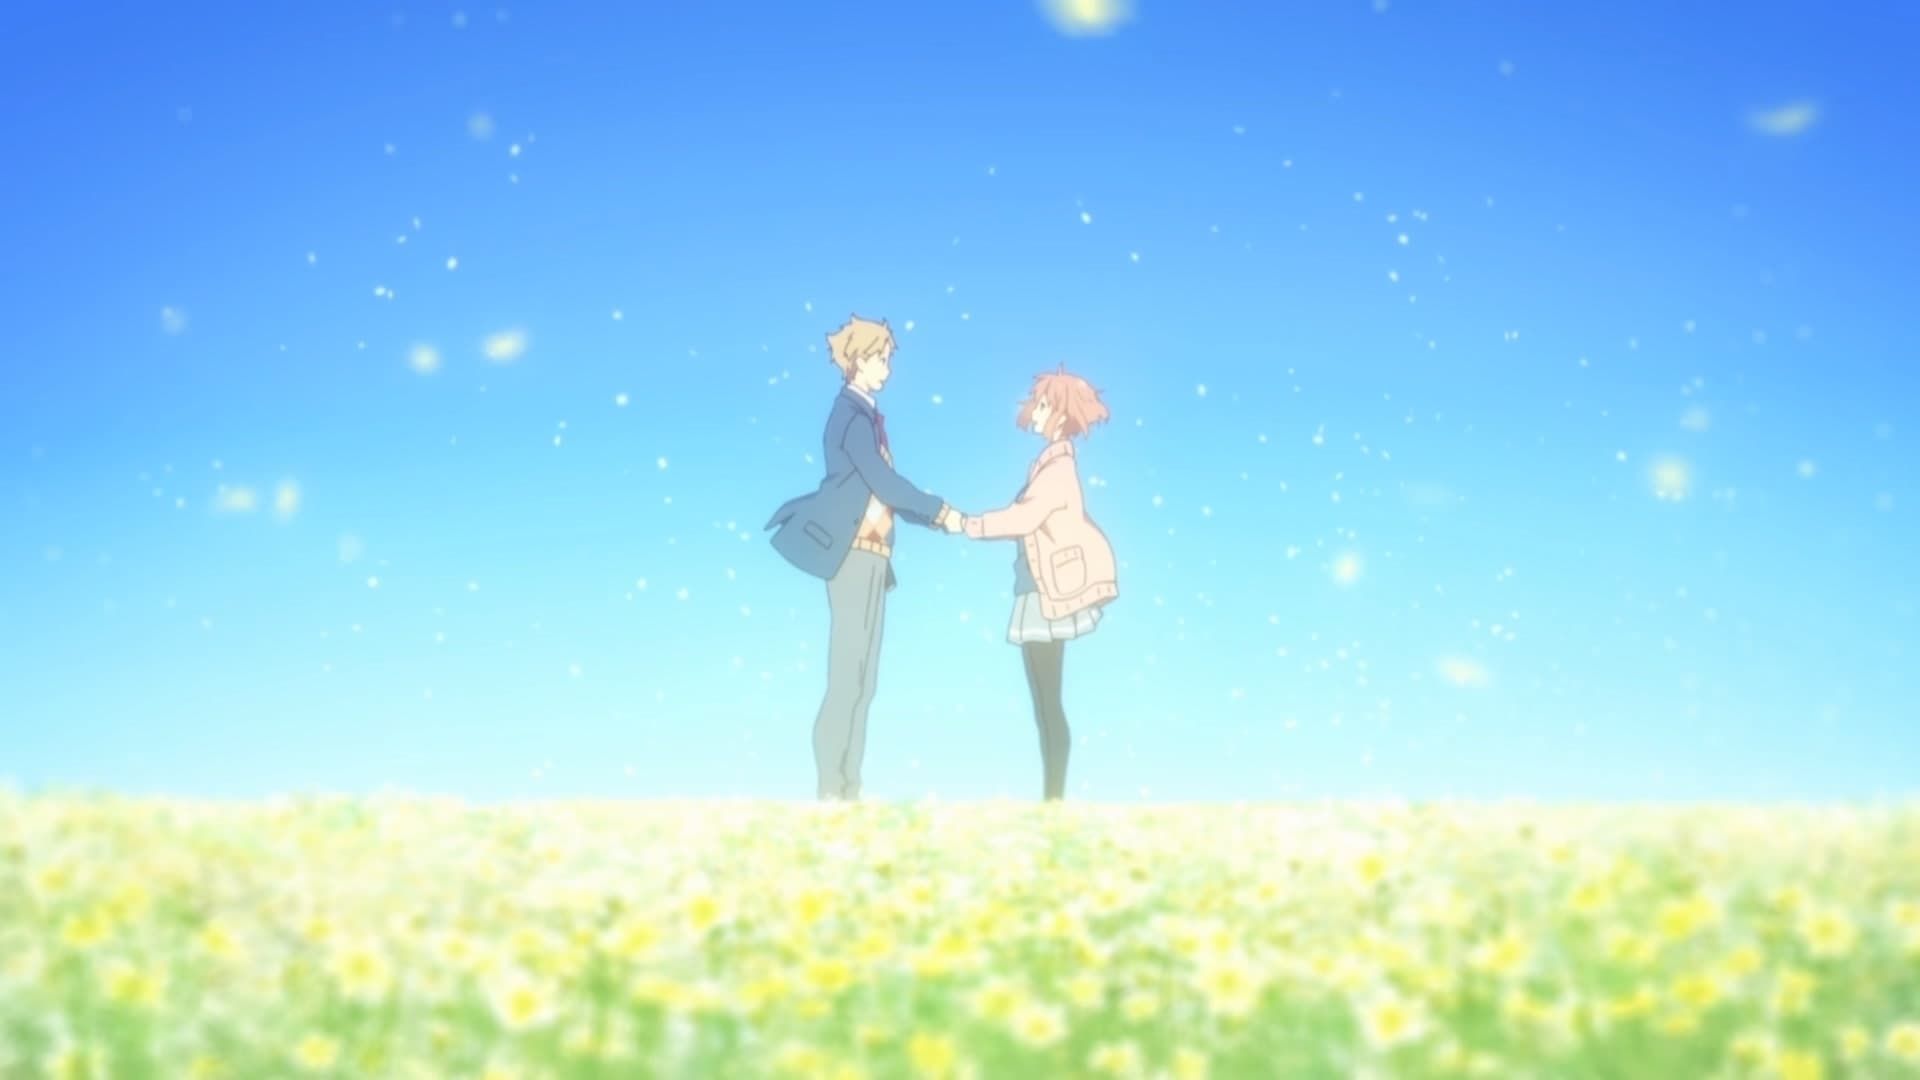 Beyond the Boundary The Movie: I'll be There - The Future (2015)